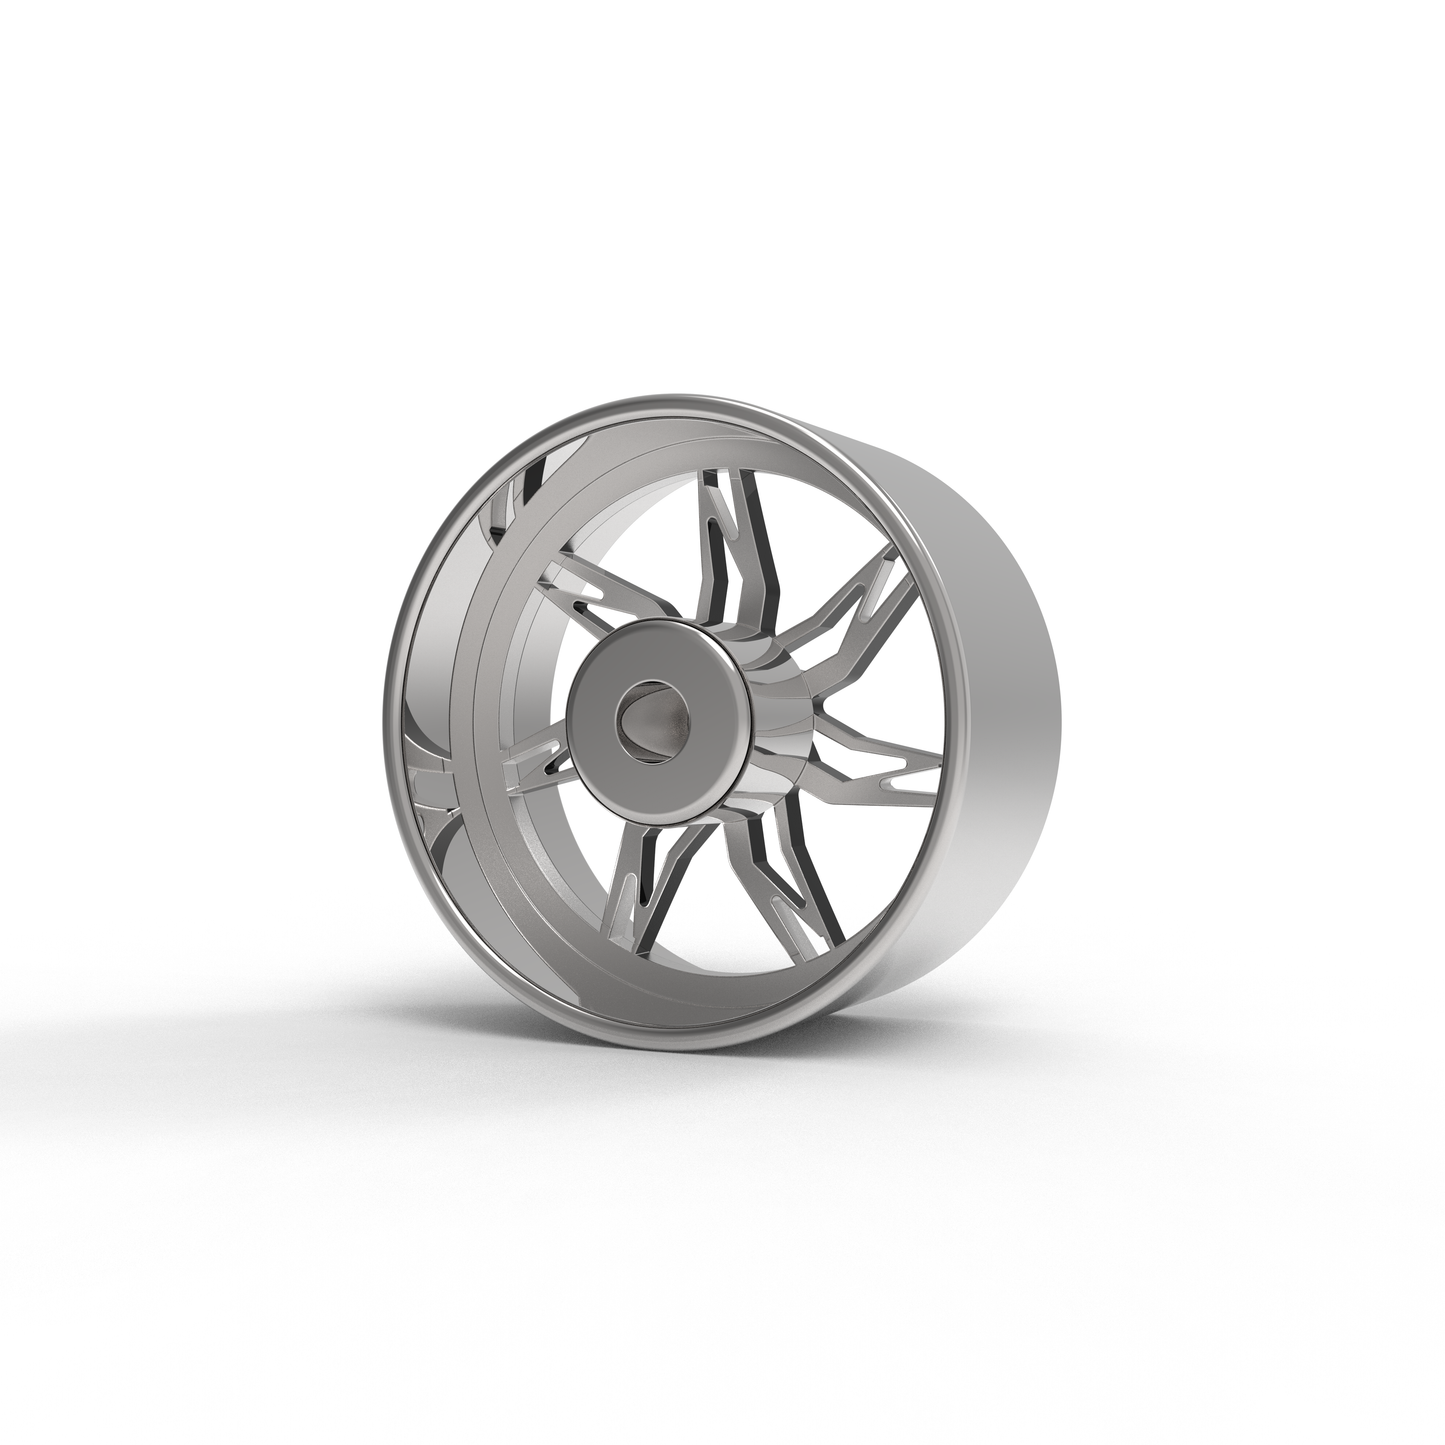 RUCCI FORGED COPO WHEEL 3D MODEL